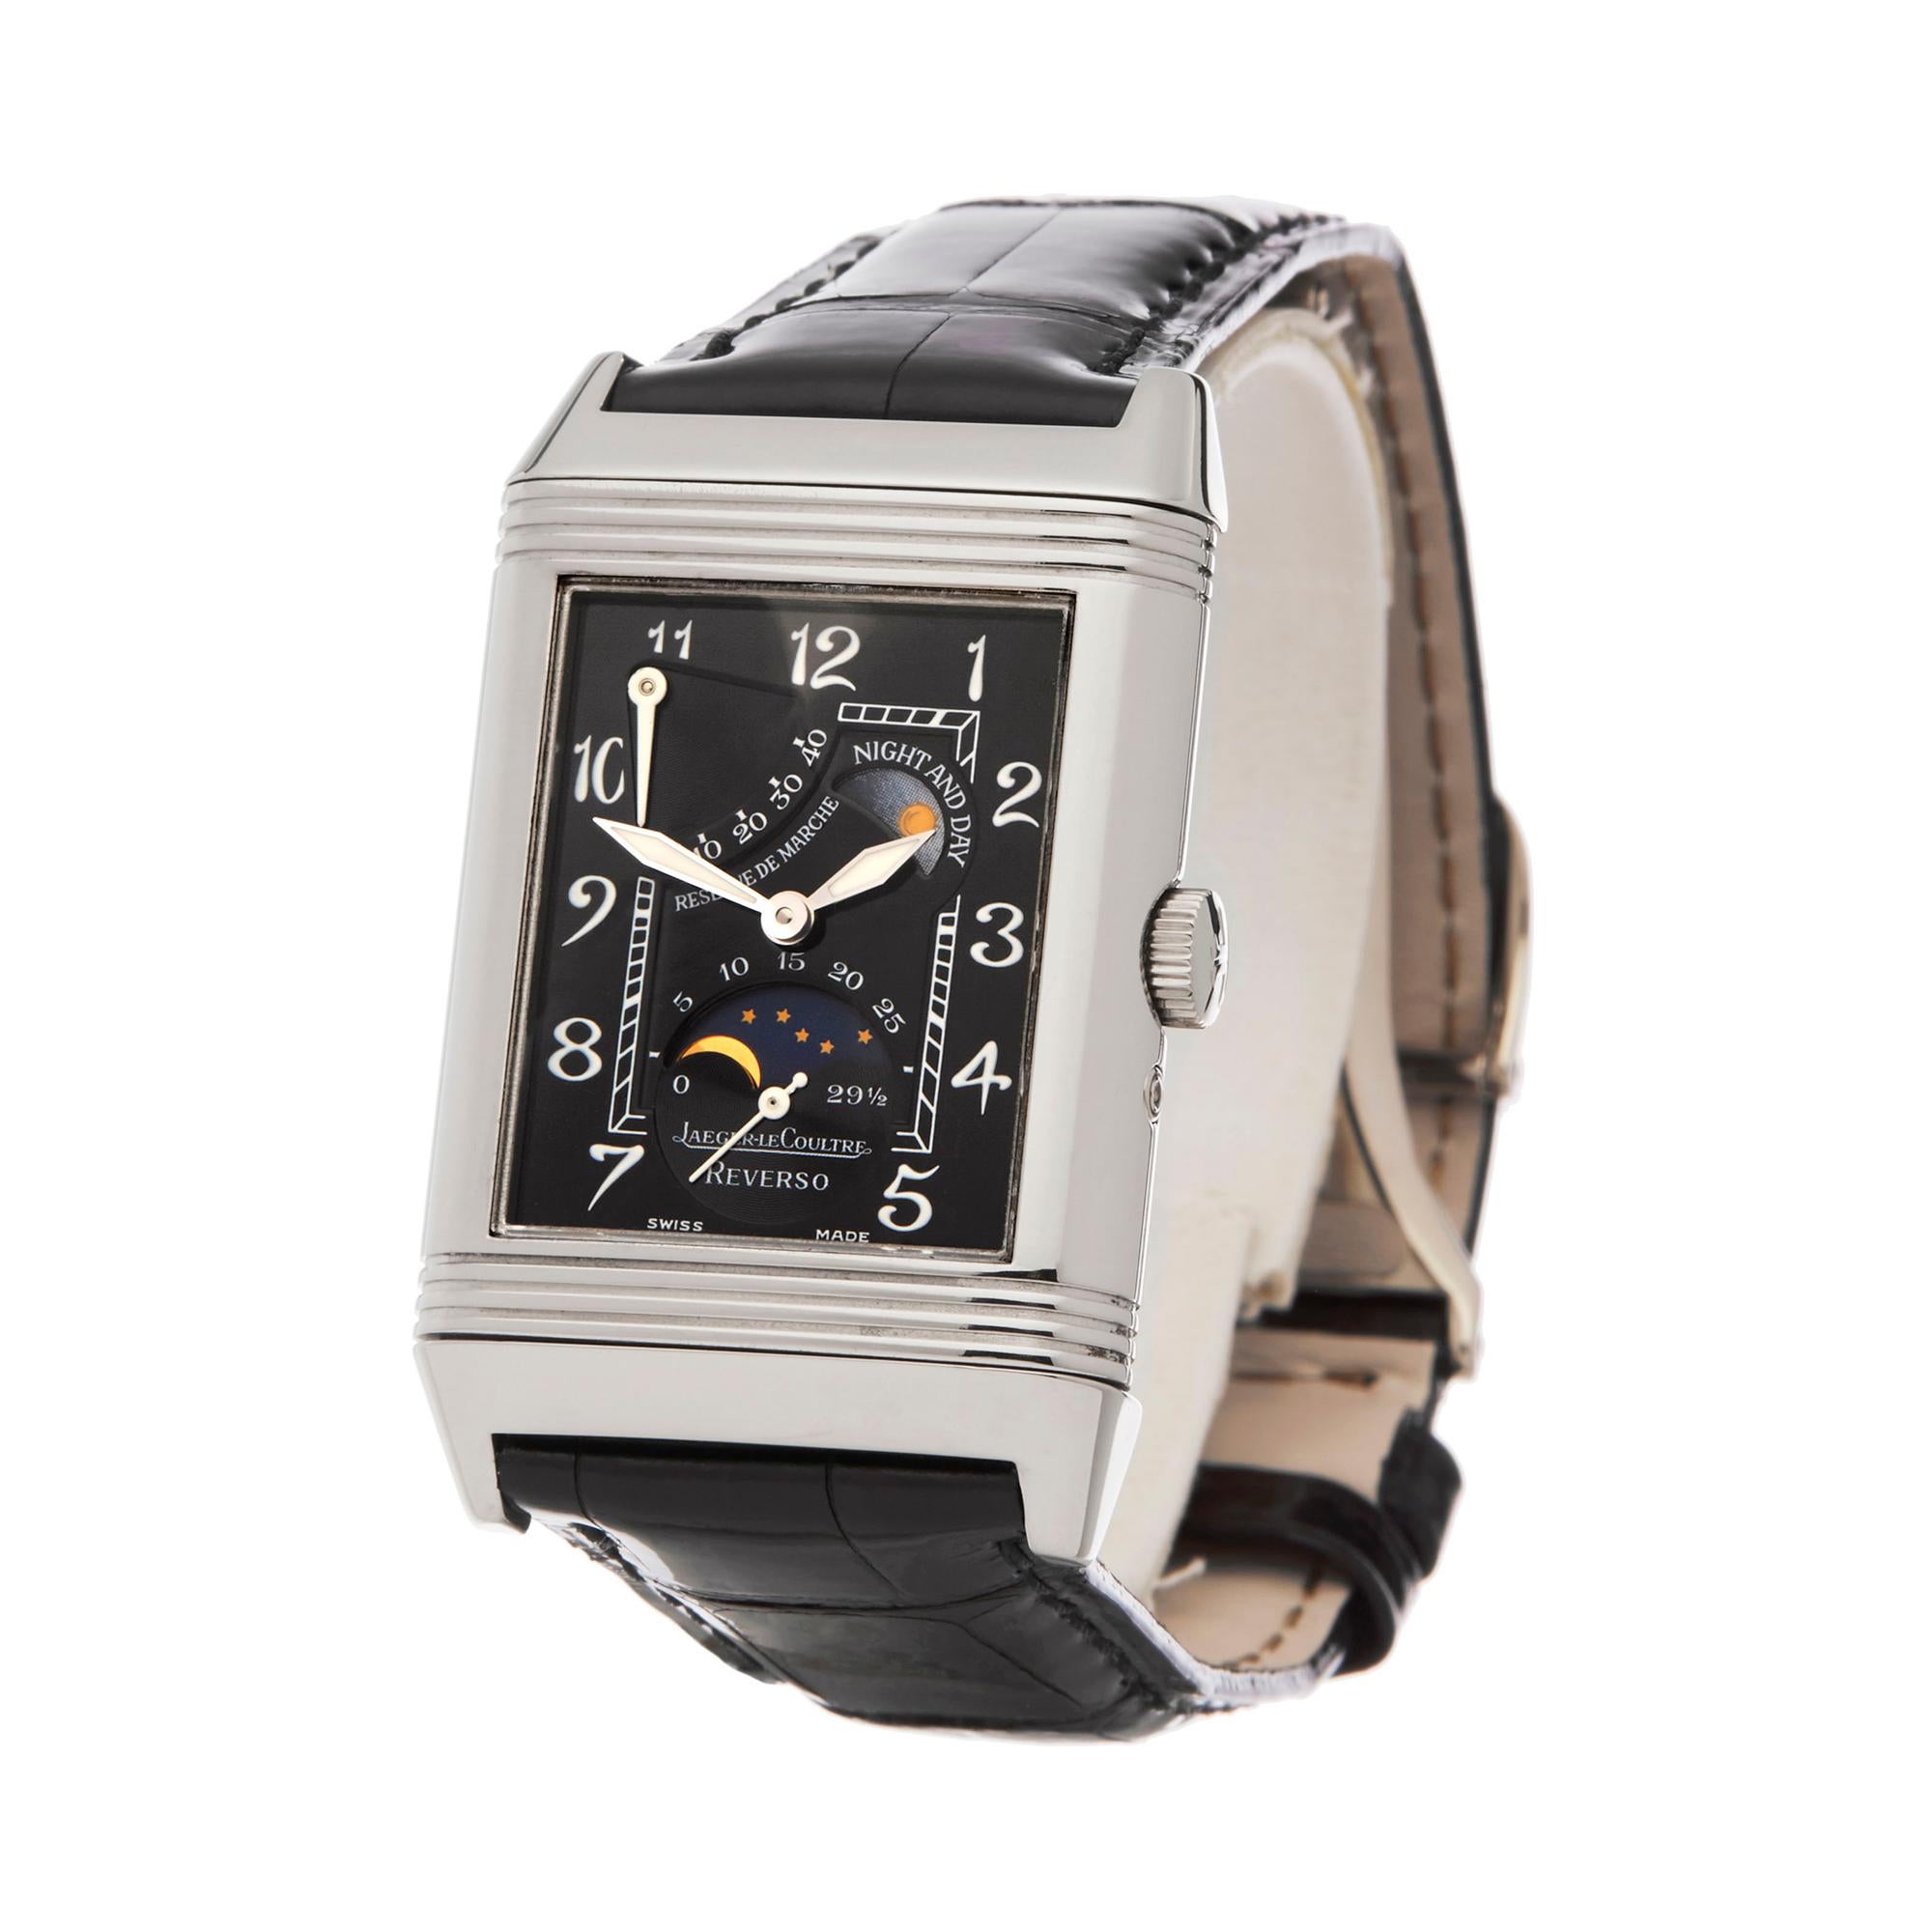 Ref: W6190
Manufacturer: Jaeger-LeCoultre
Model: Reverso
Model Ref: 270.3.63
Age: 10th February 1999
Gender: Mens
Complete With: Box, Manuals, Guarantee, Service Pouch and Service Papers dated 4th July 2019
Dial: Black Roman
Glass: Sapphire